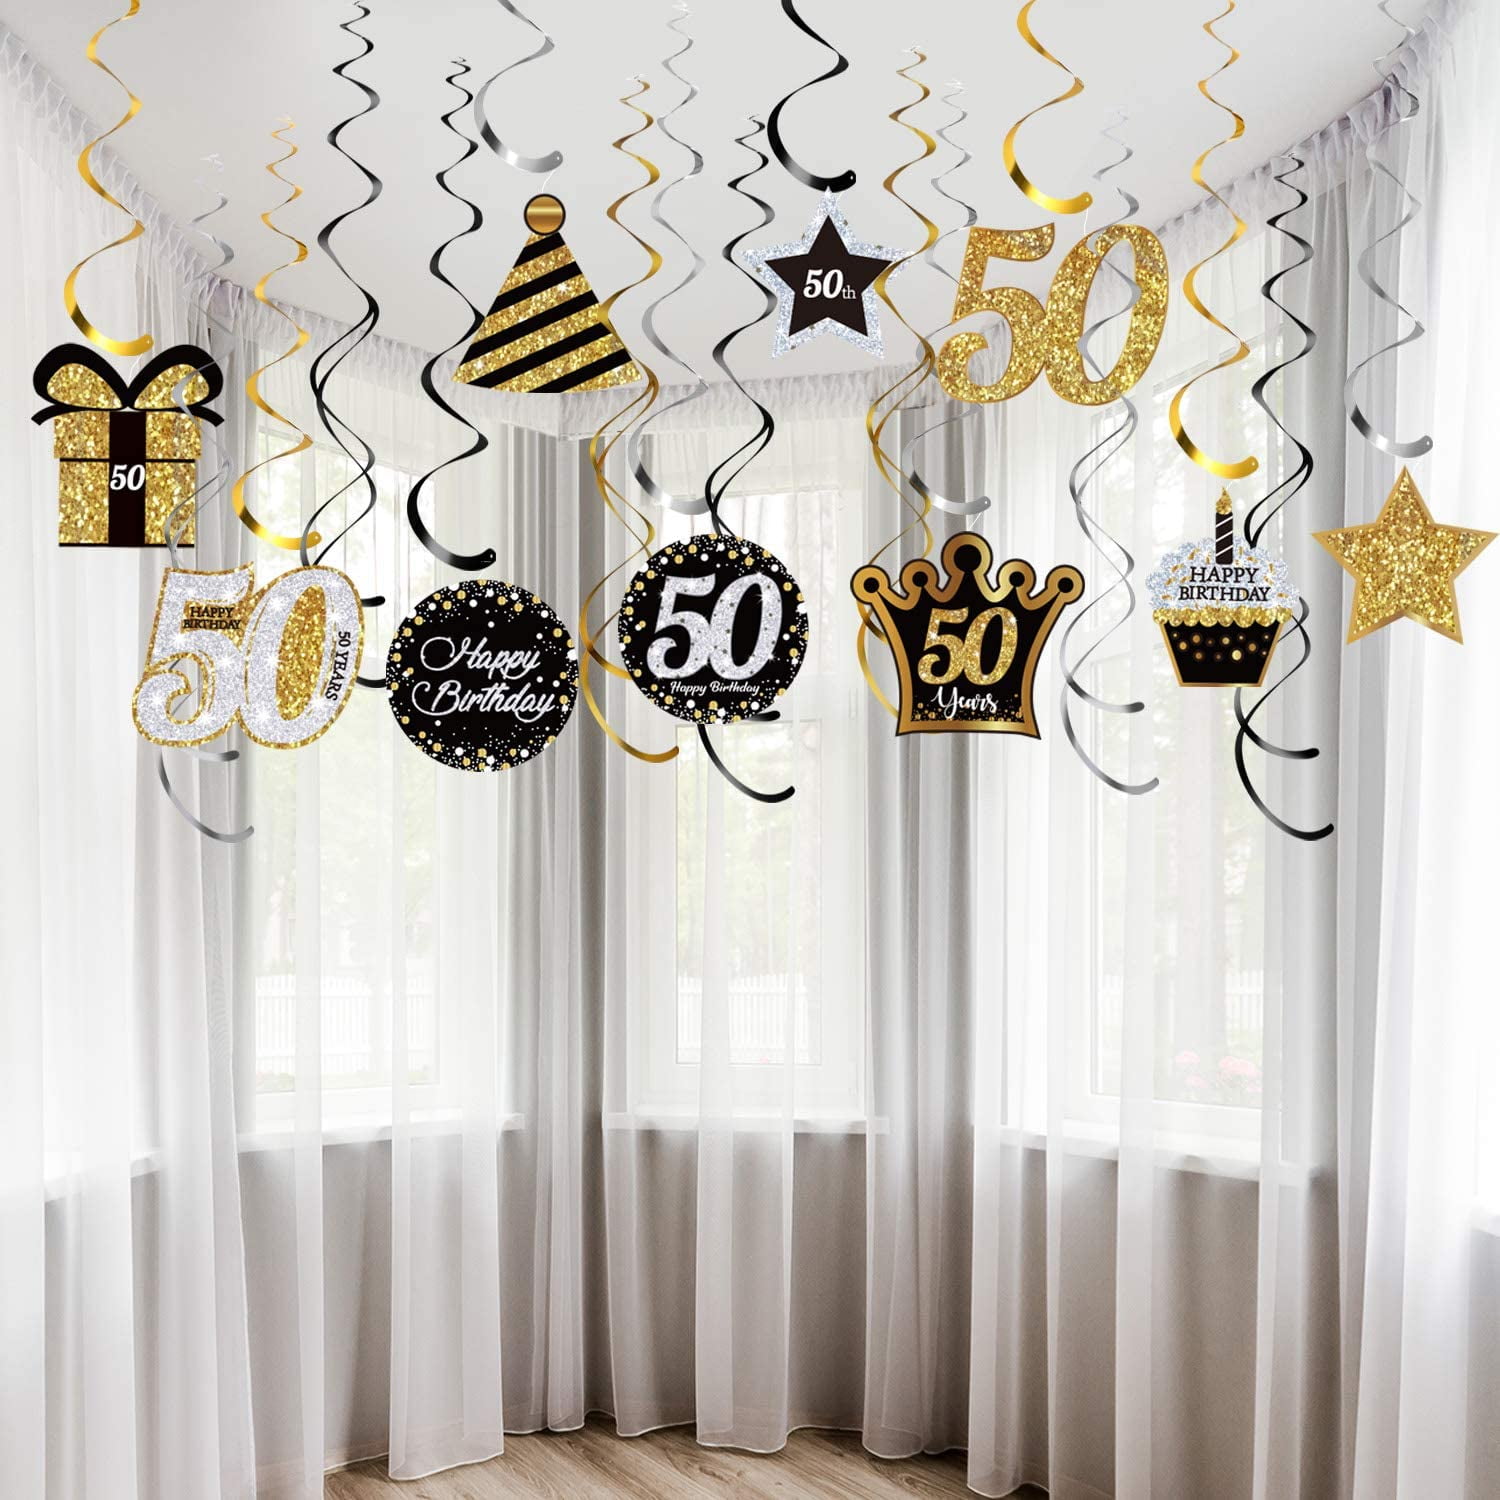 PARTY ON CELEBRATION HANGING SWIRL DECORATIONS ~ Birthday Party Supplies Foil 